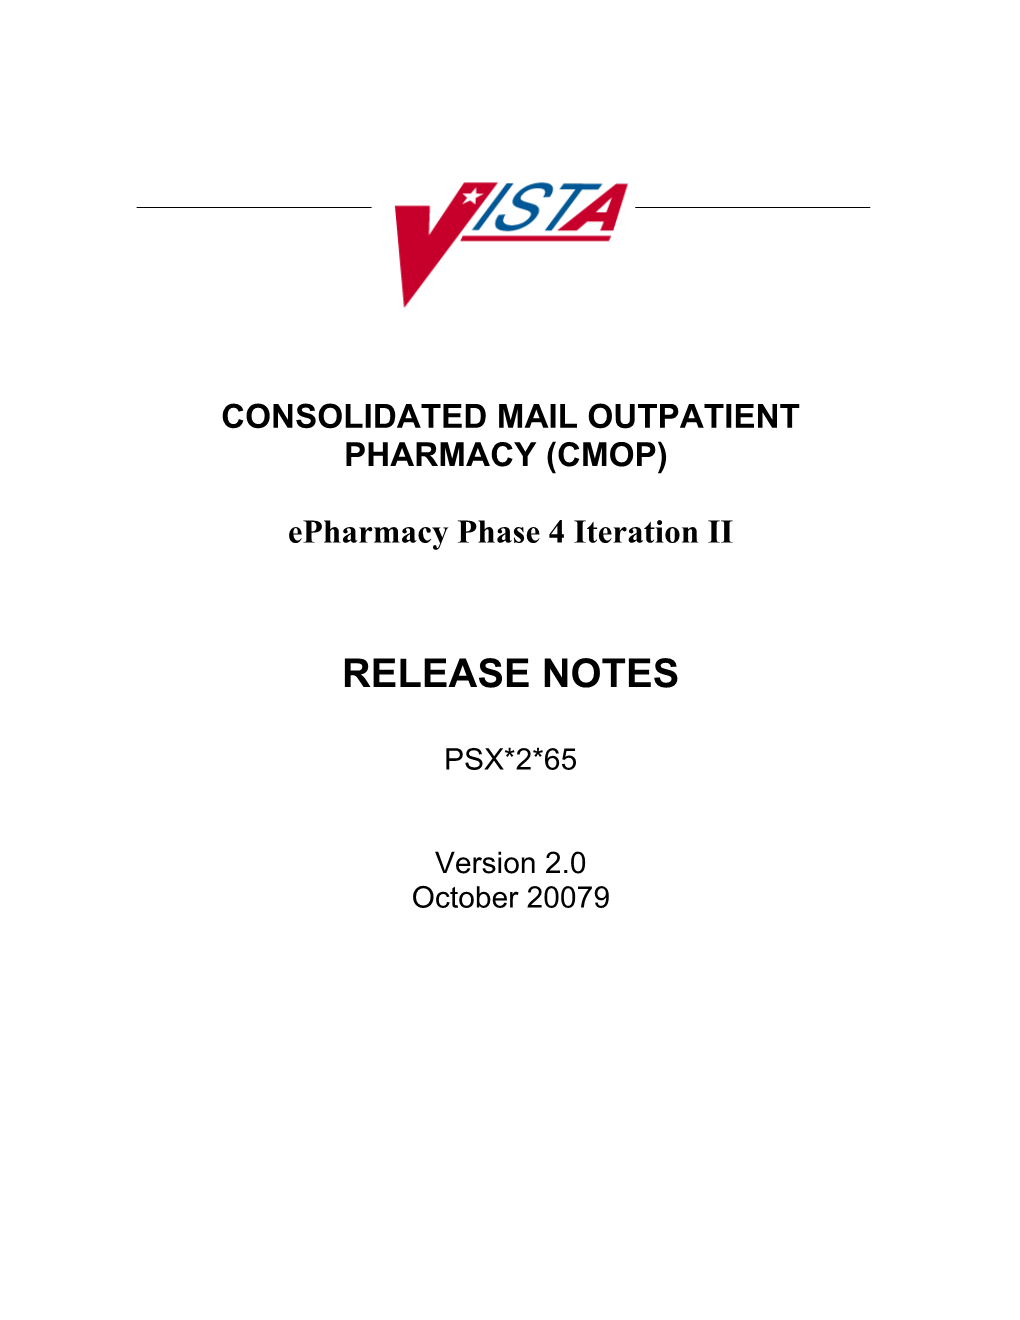 Pharmacy FY08 Q1 Release Notes